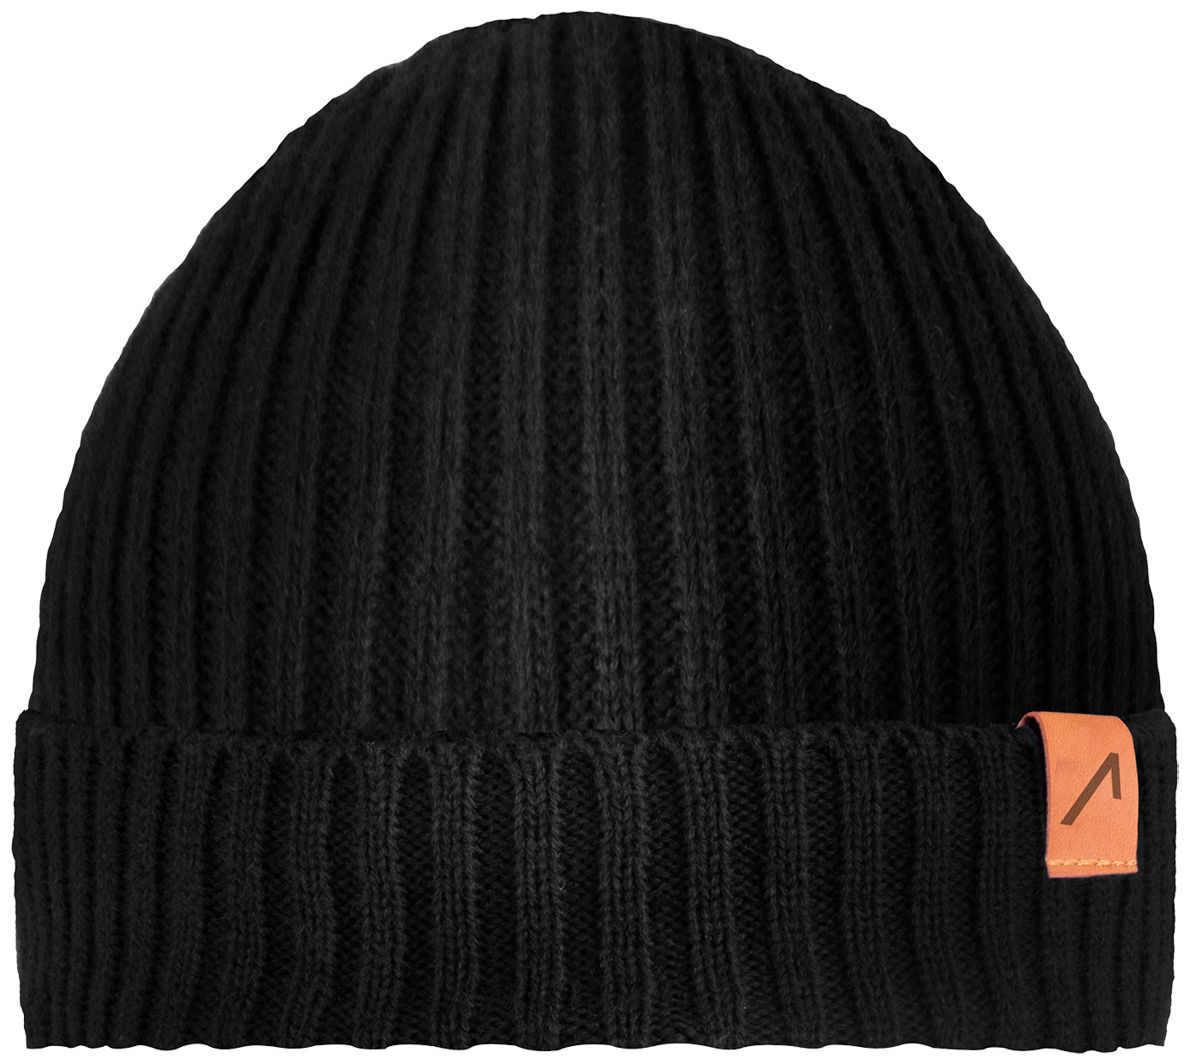 ACE Winter Hat - Adult Knitted Sheep Wool Beanie - Wool Beanie for Men & Women